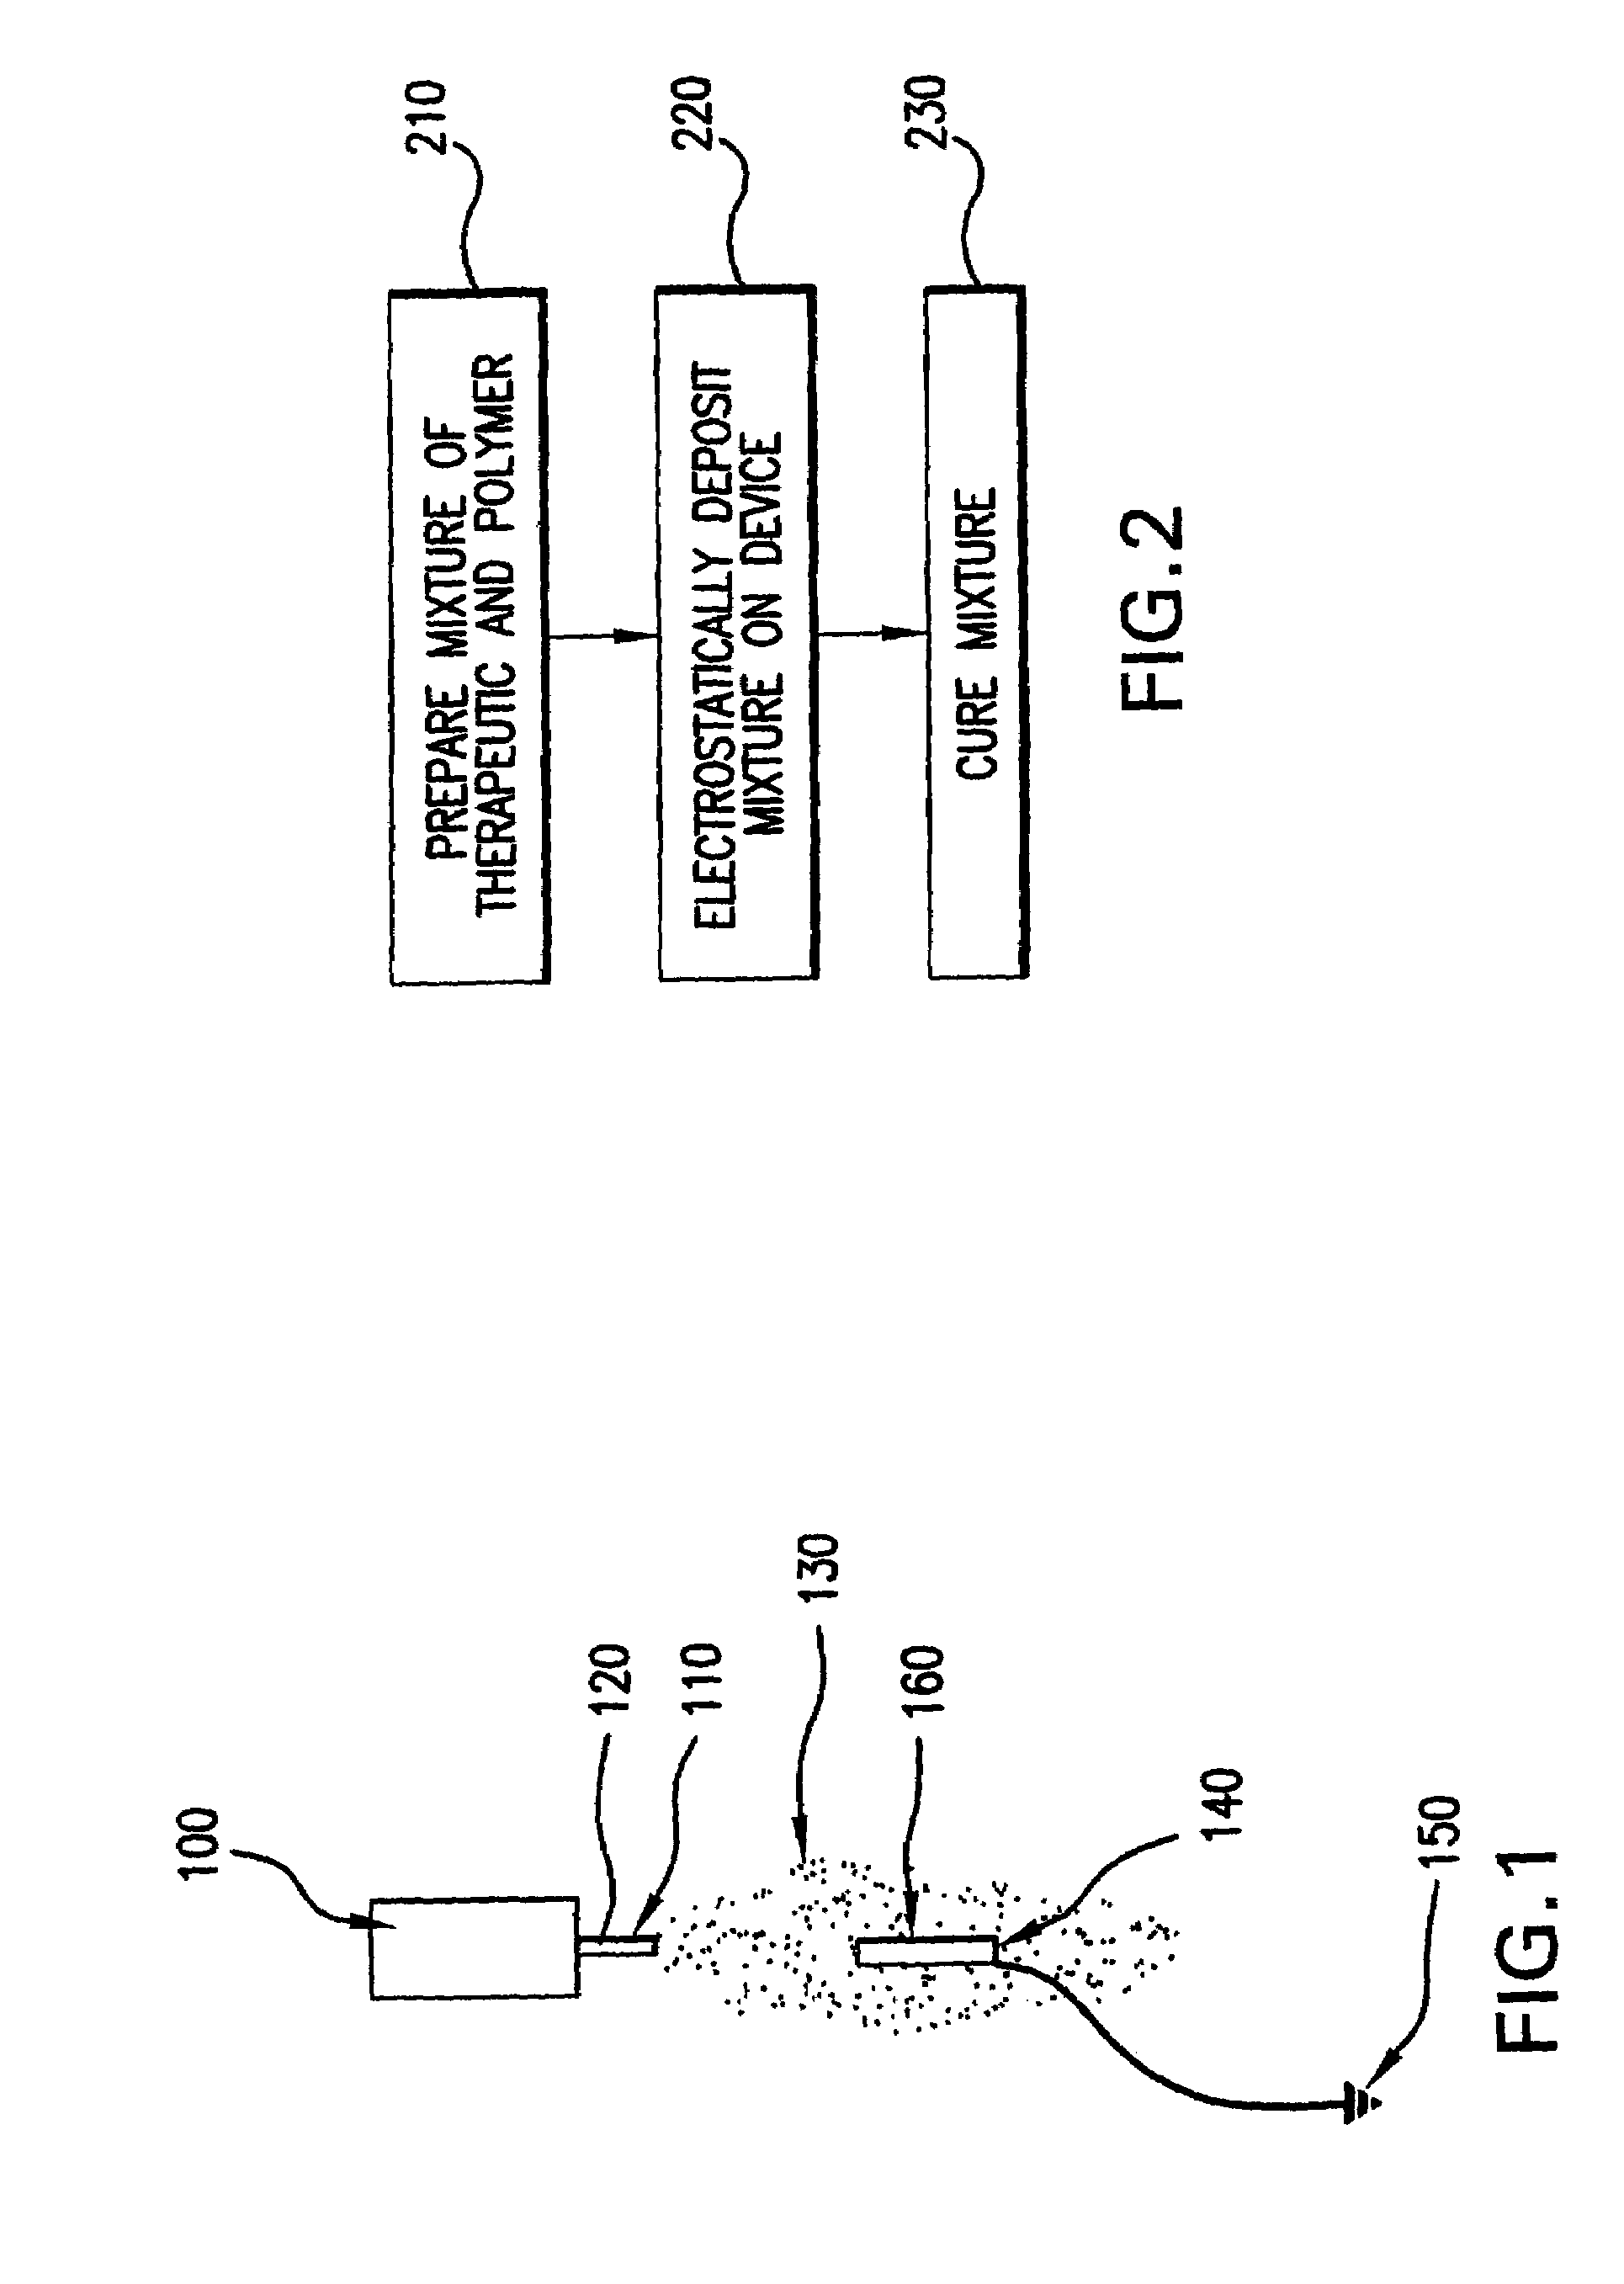 Electrostatic coating of a device